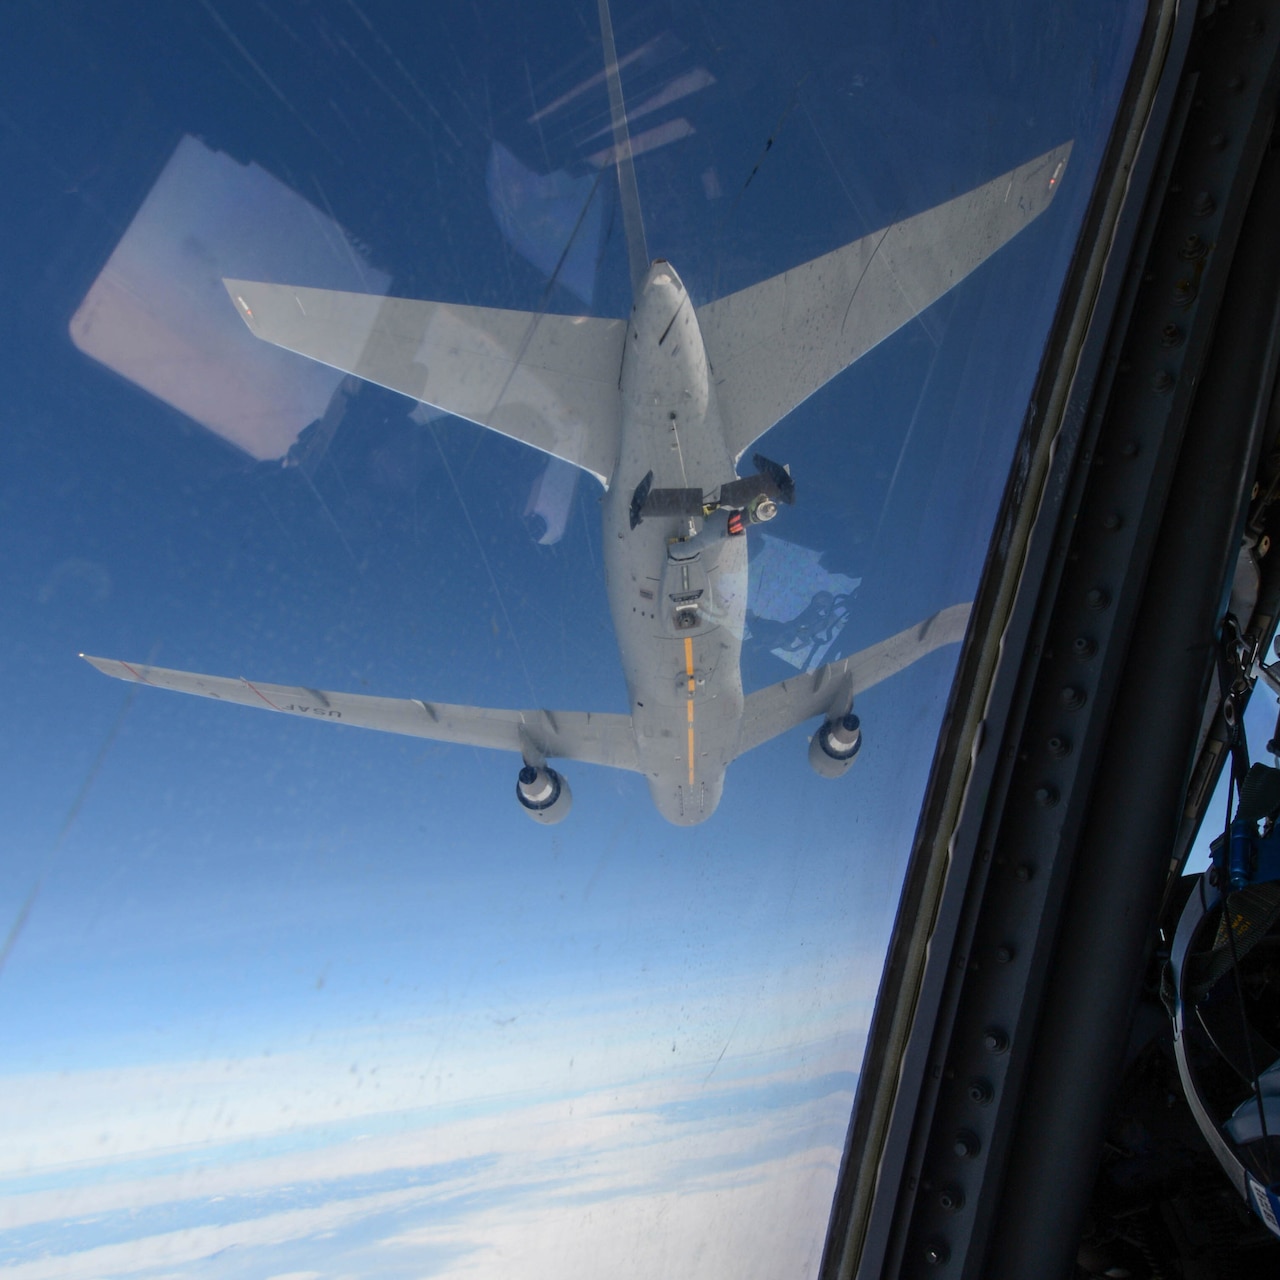 Another aircraft is visible through an aircraft window.